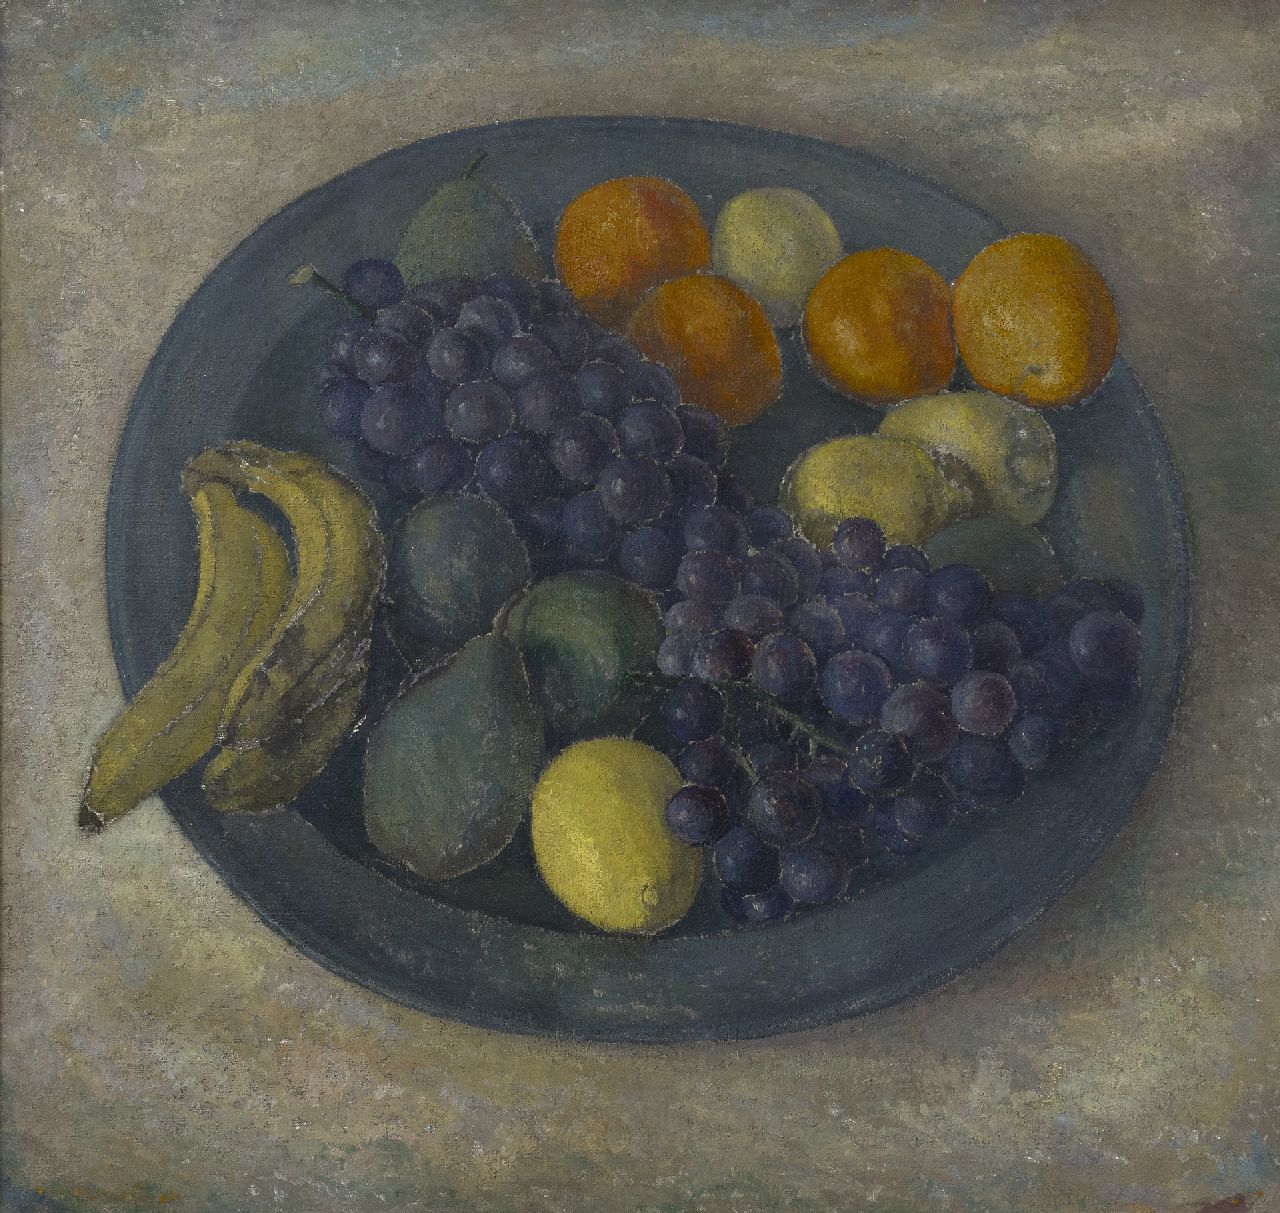 Herwijnen J.A.G. van | Johannes Adrianus George 'Jan' van Herwijnen | Paintings offered for sale | A still life of fruits, oil on canvas 76.1 x 80.0 cm, signed l.l. and executed ca. 1936-1937